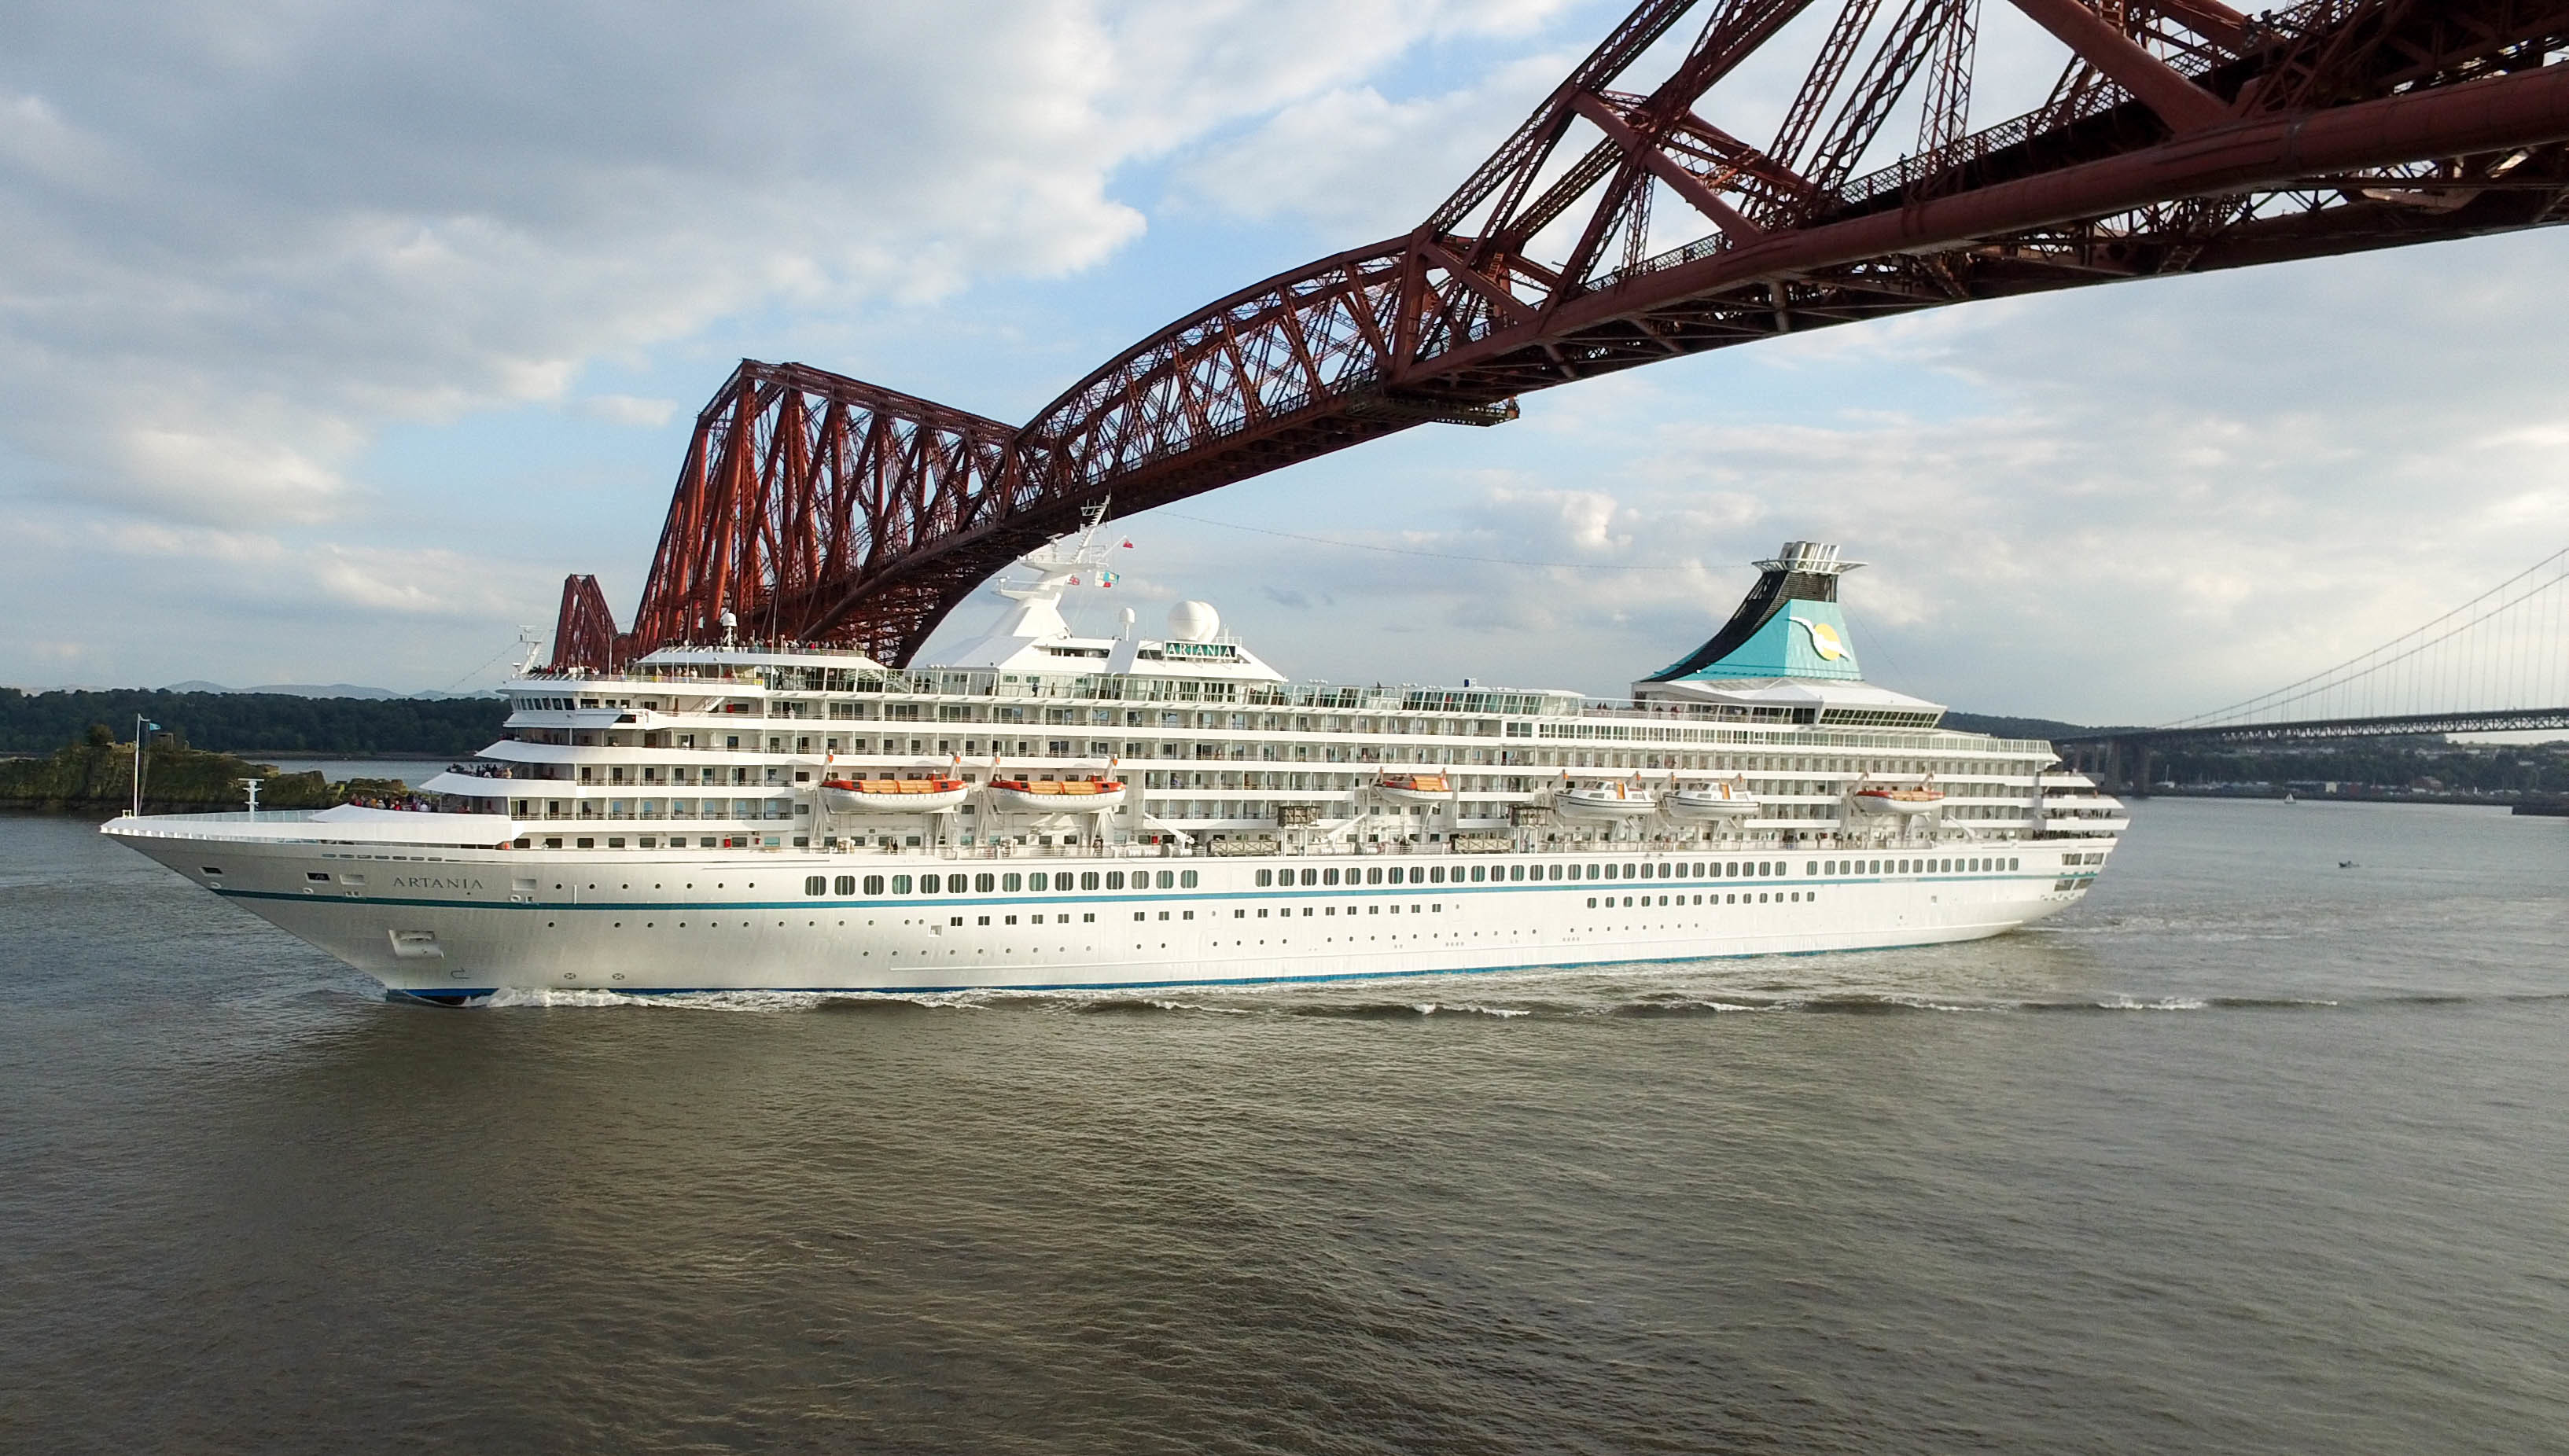 Cruise ships are to become an increasingly regular site in the area.